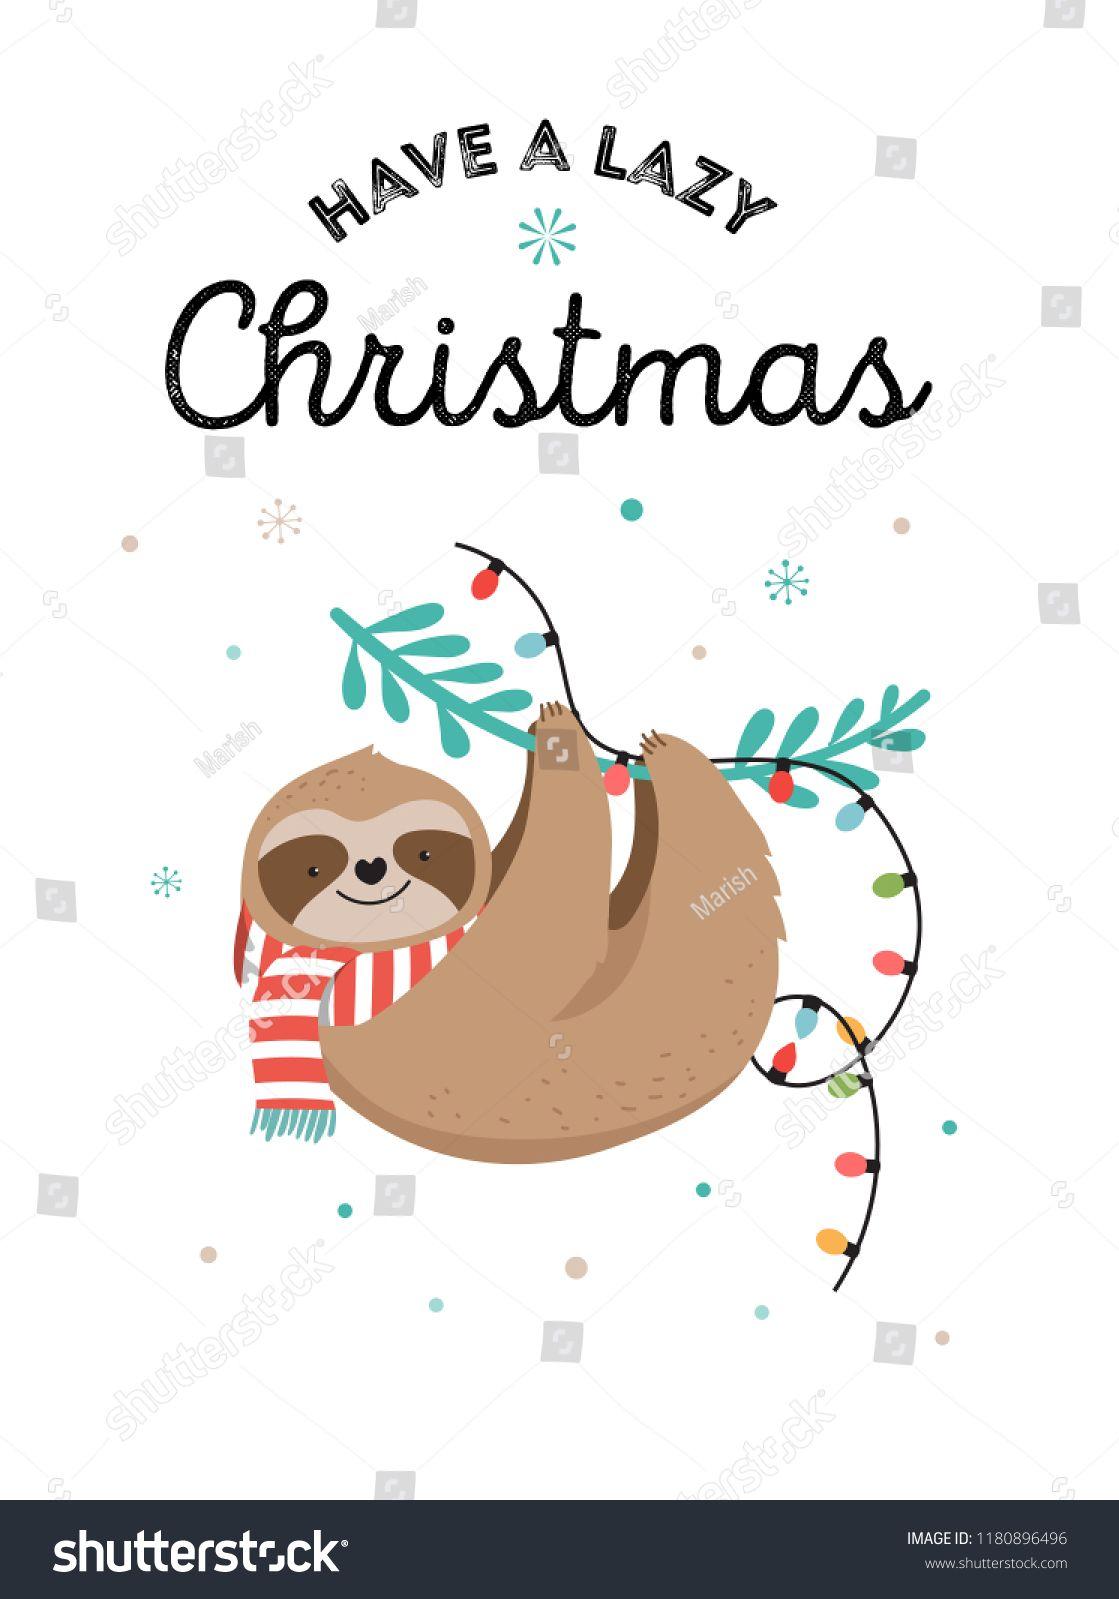 Cute lazy sloths funny Merry Christmas illustrations with Santa